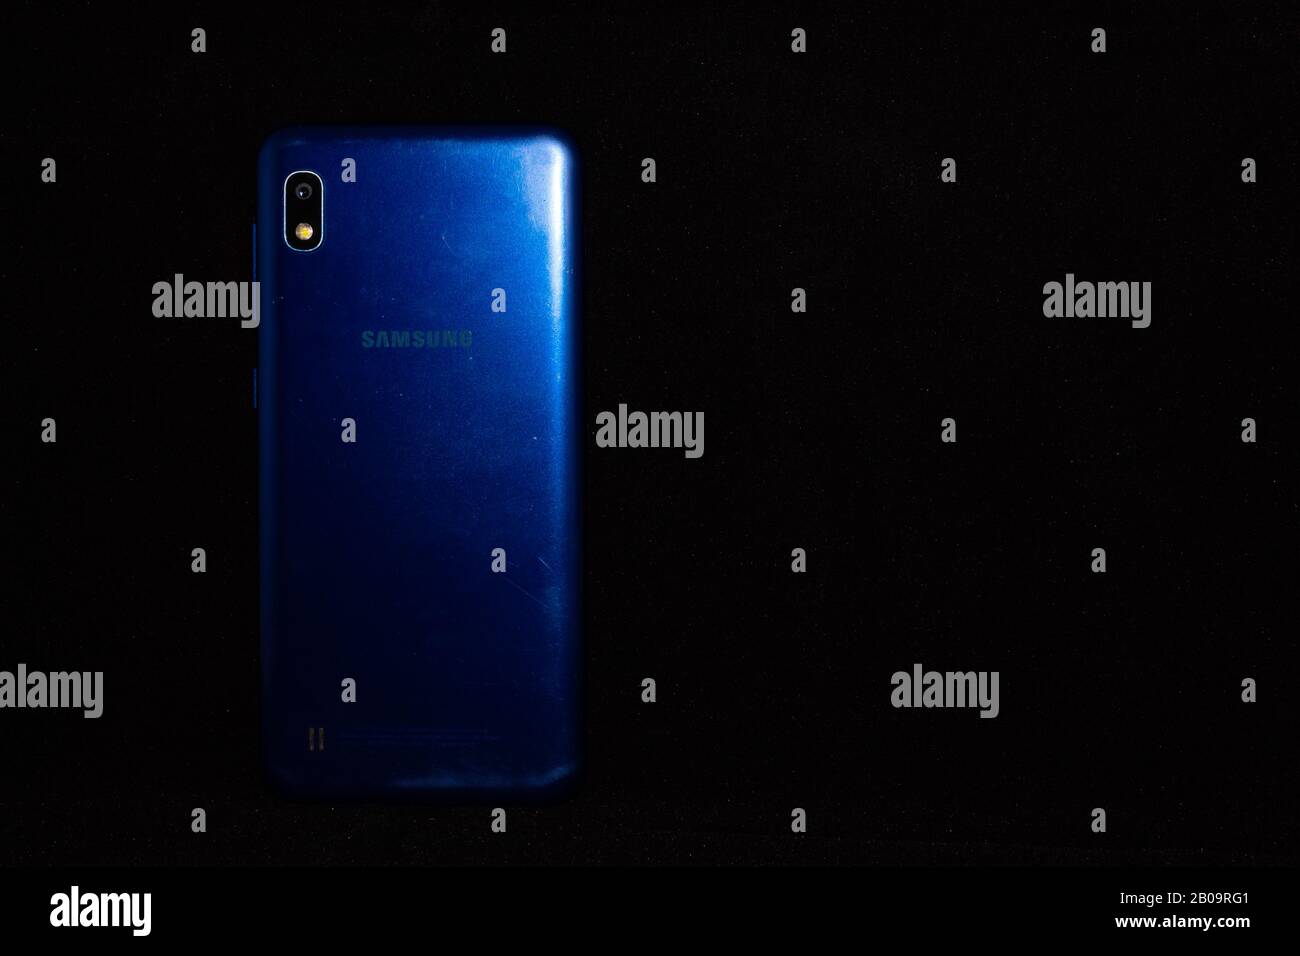 Culiacan, Sinaloa, Mexico - January 20 2019: Blue cell phone of Korean brand with black background Stock Photo